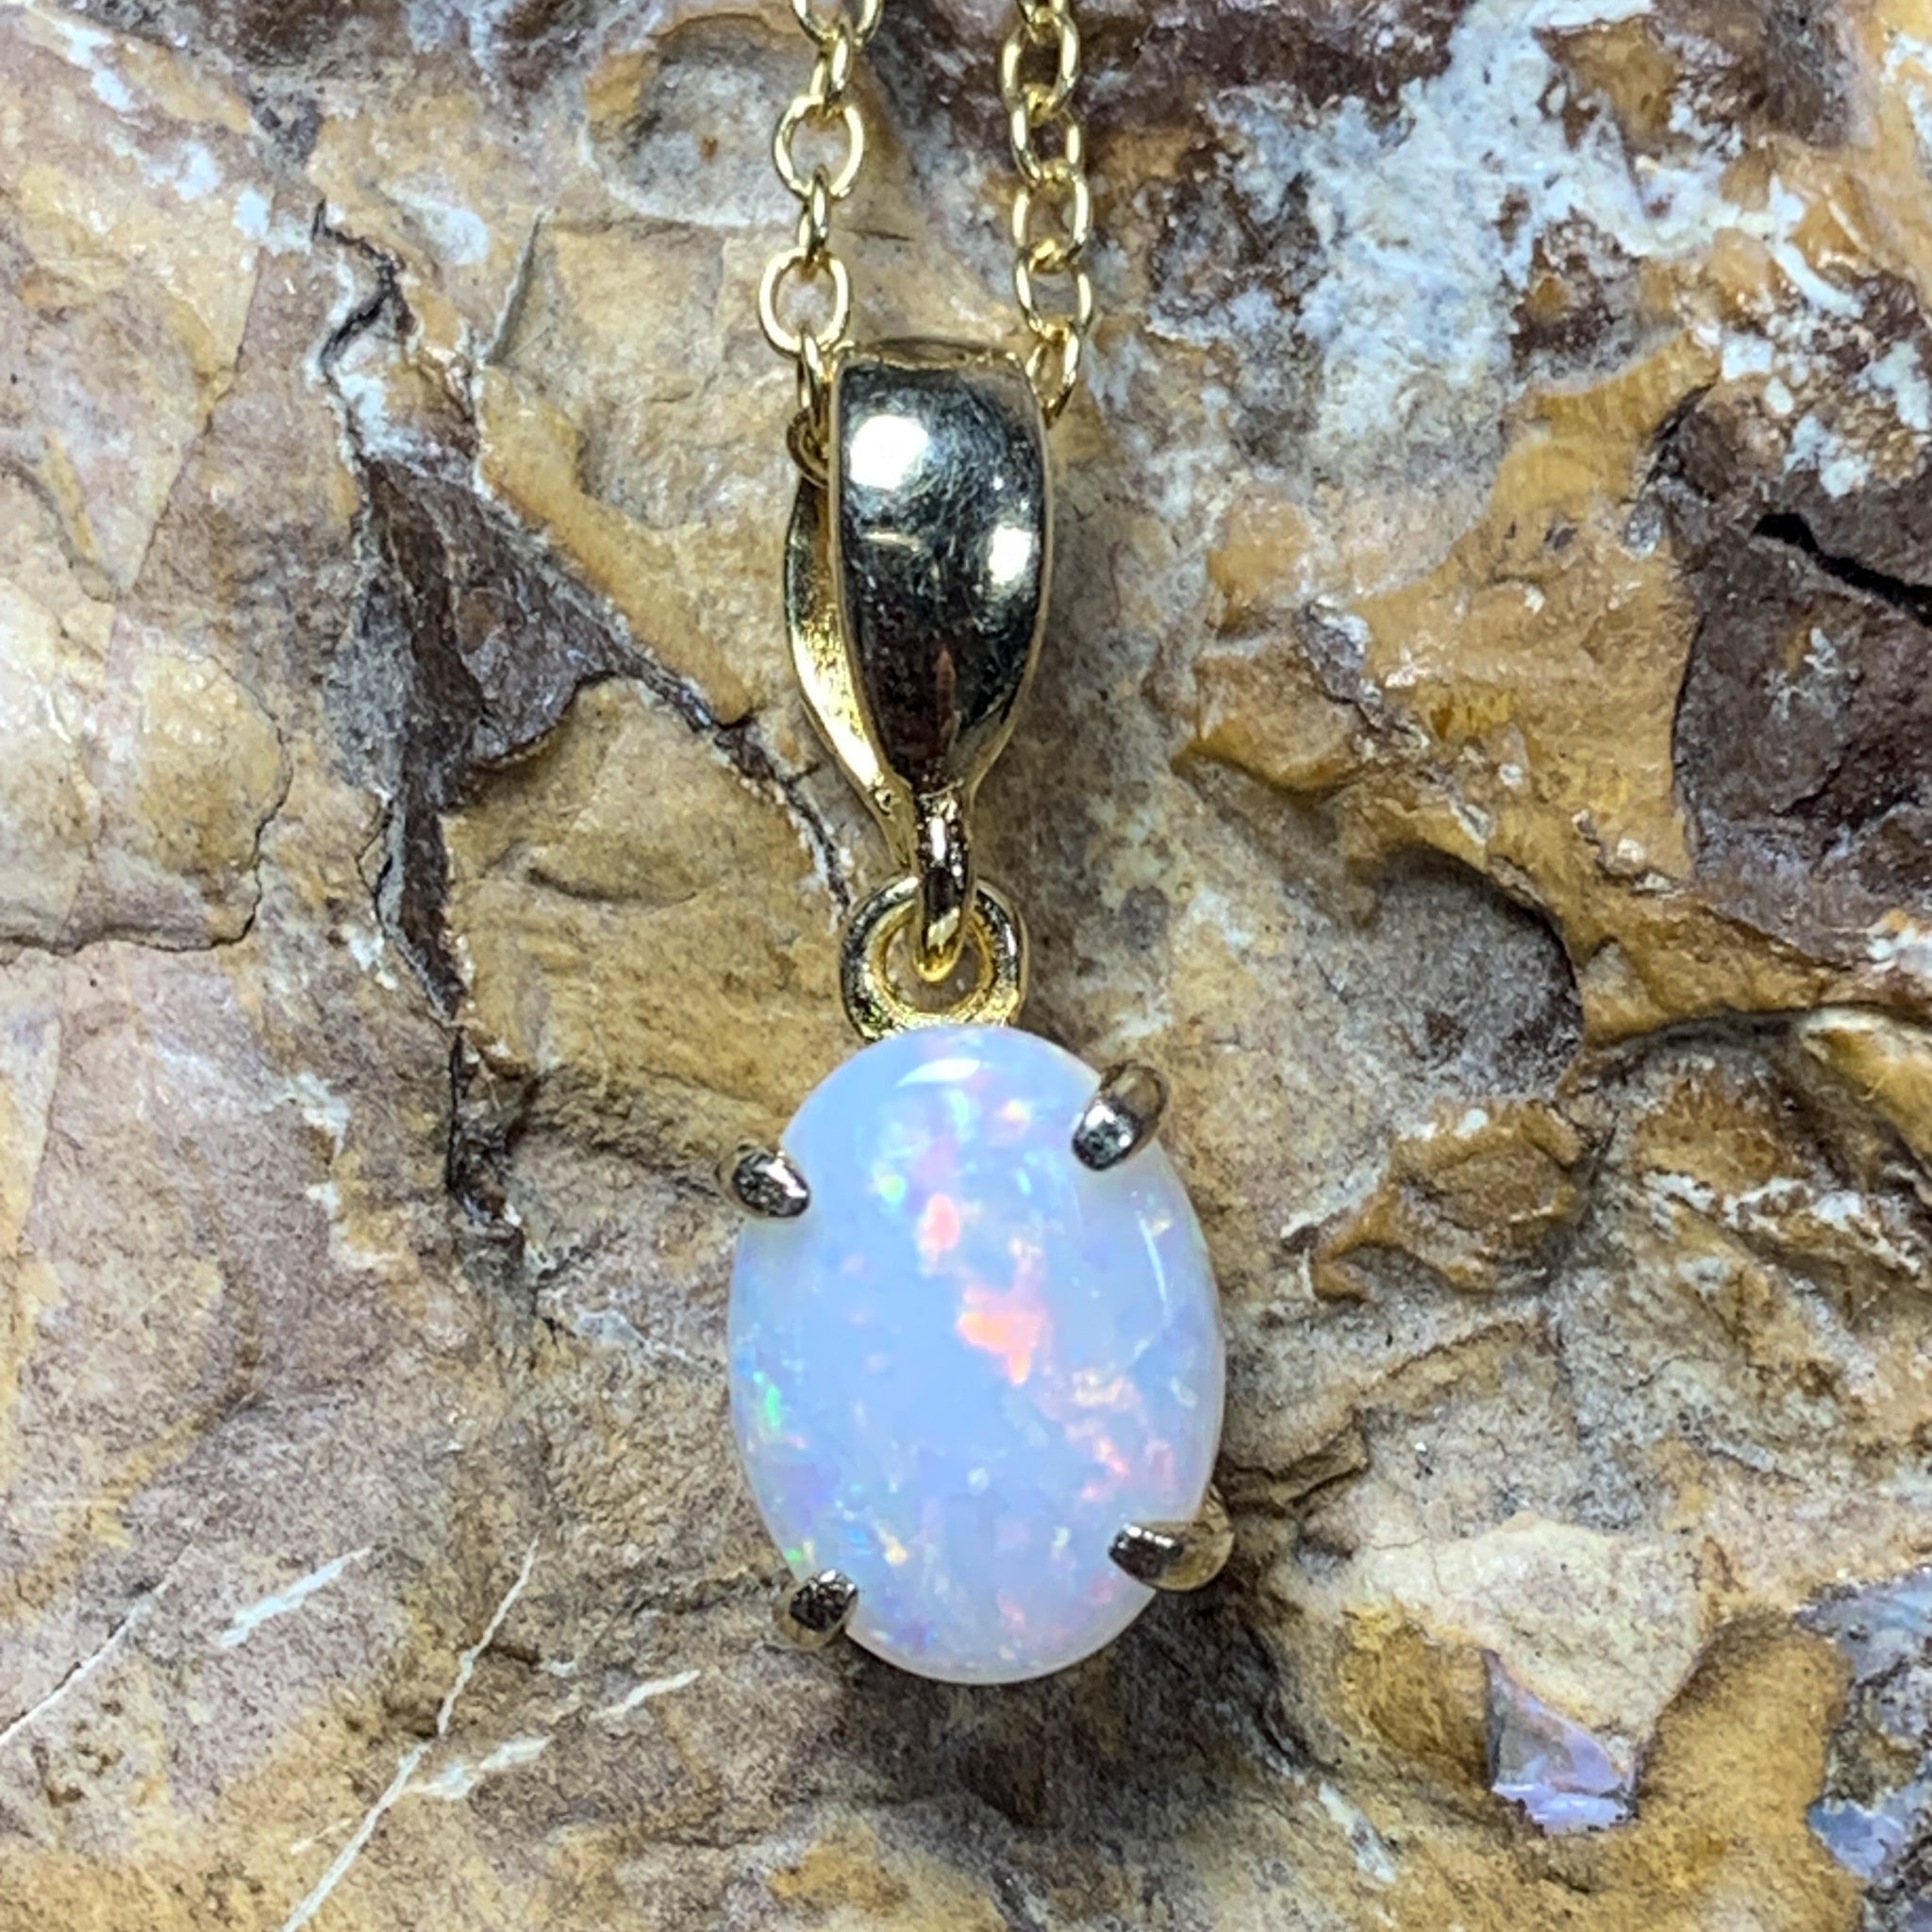 Gold Plated Sterling Silver 8x6mm White Opal pendant Necklace l solitaire style - Masterpiece Jewellery Opal & Gems Sydney Australia | Online Shop